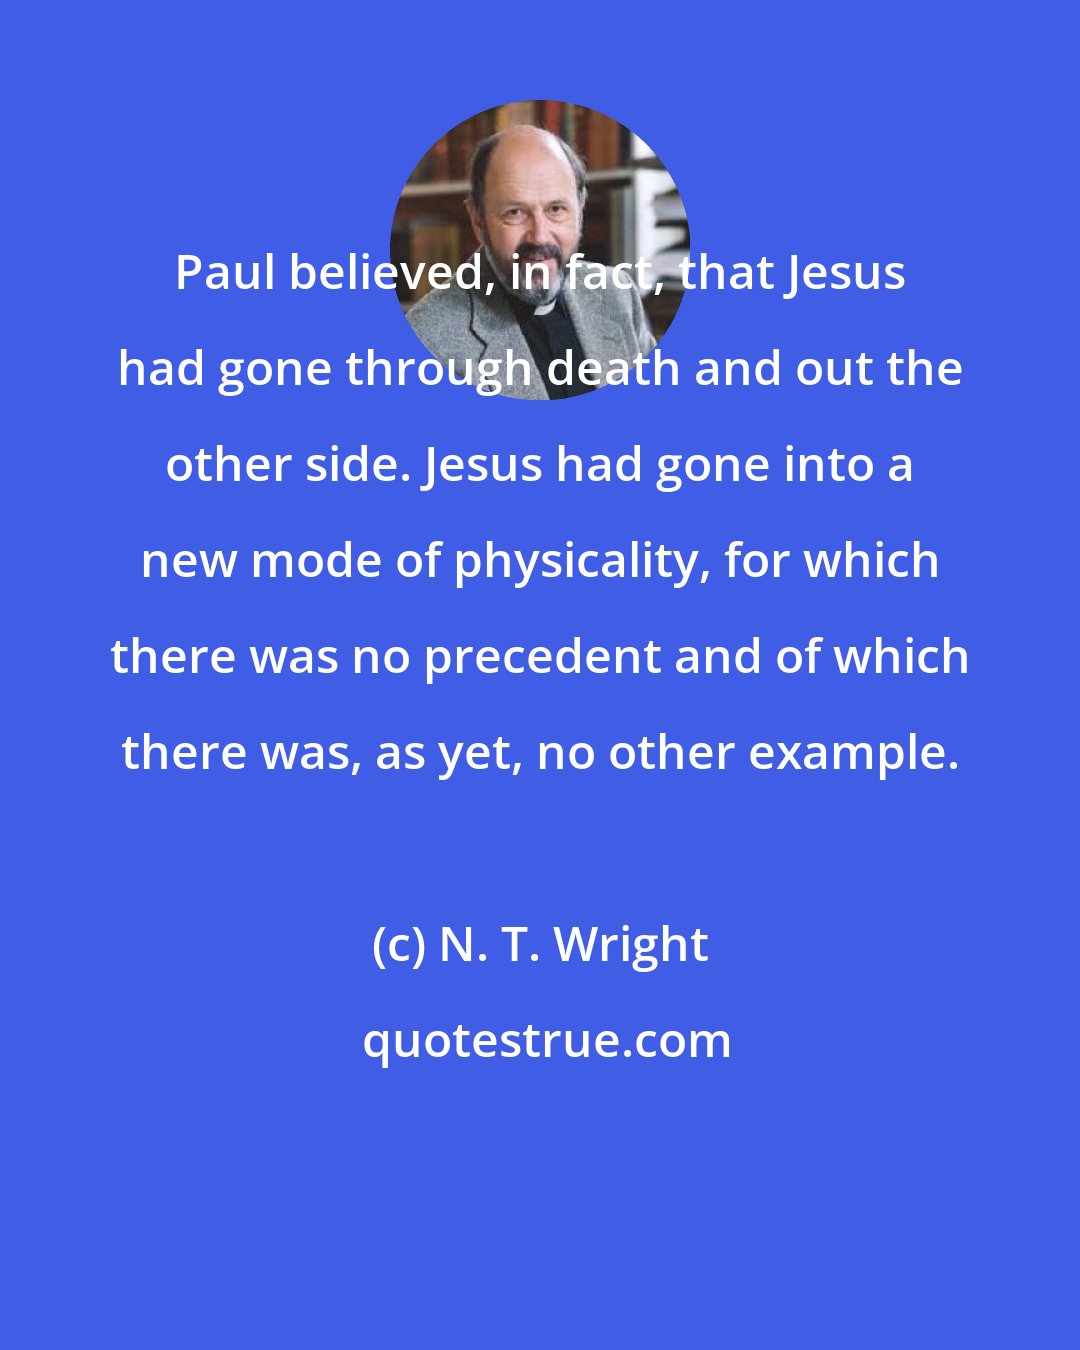 N. T. Wright: Paul believed, in fact, that Jesus had gone through death and out the other side. Jesus had gone into a new mode of physicality, for which there was no precedent and of which there was, as yet, no other example.